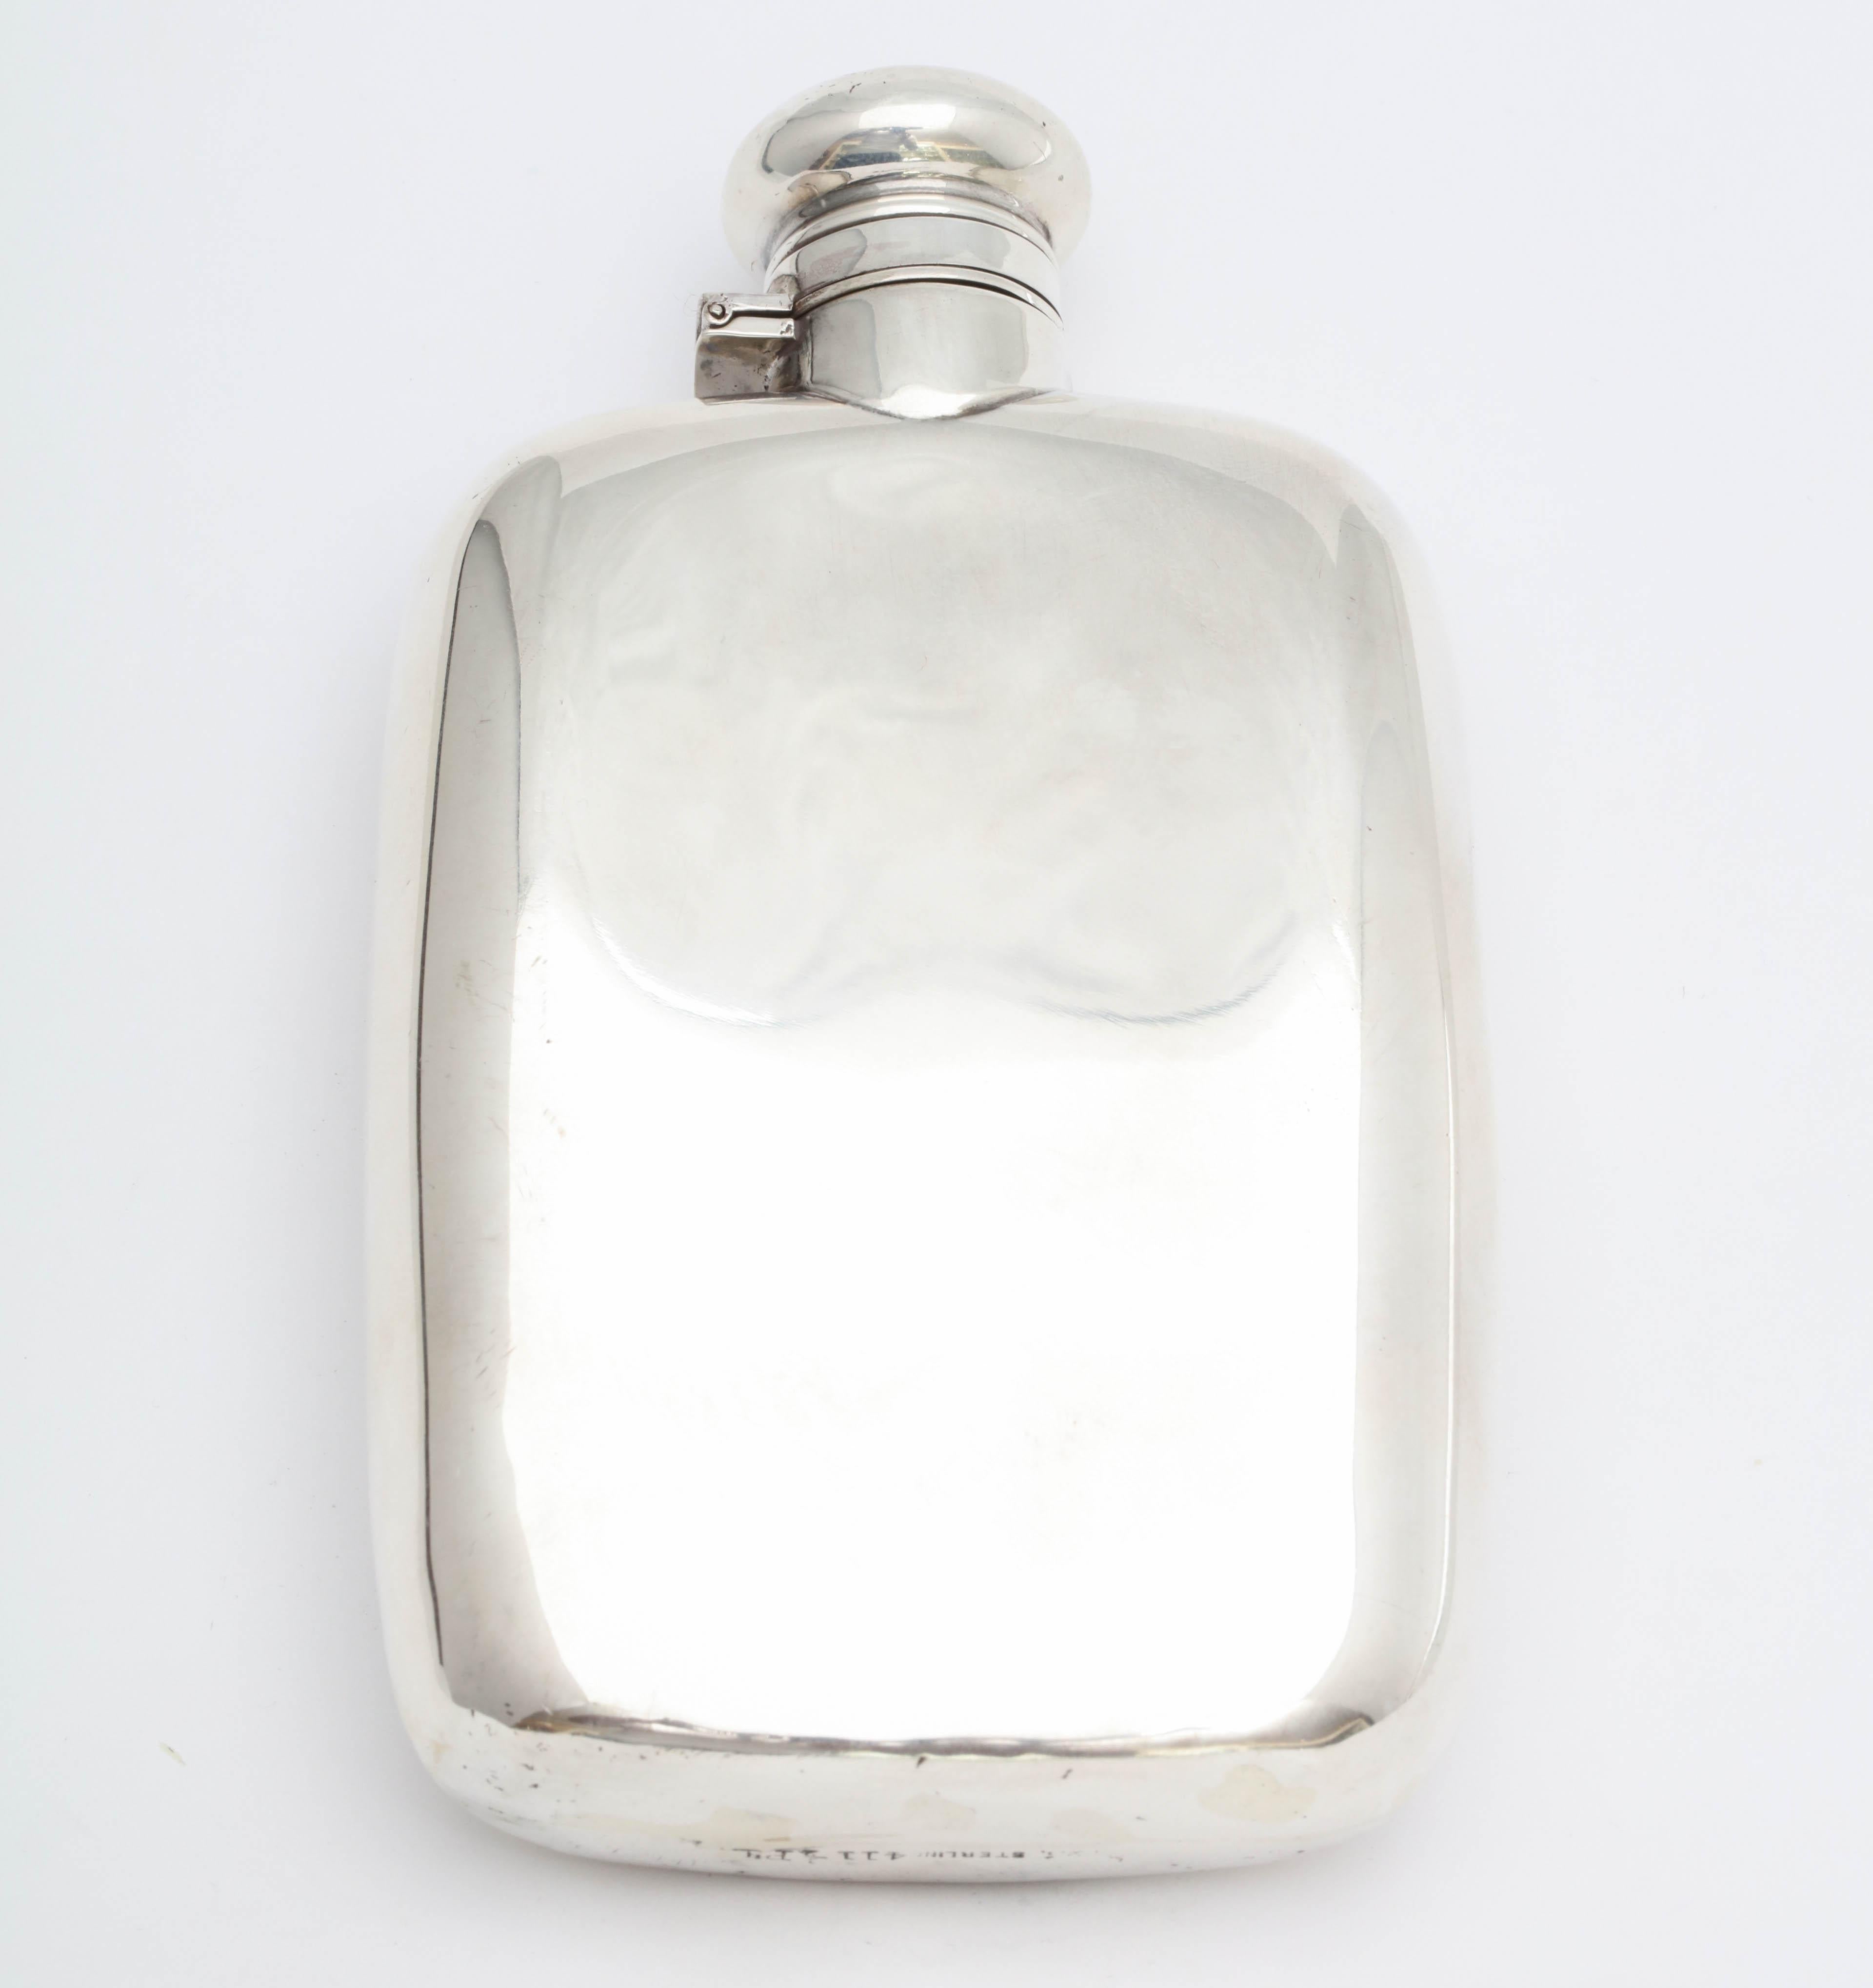 American Edwardian Sterling Silver Flask with Hinged Lid